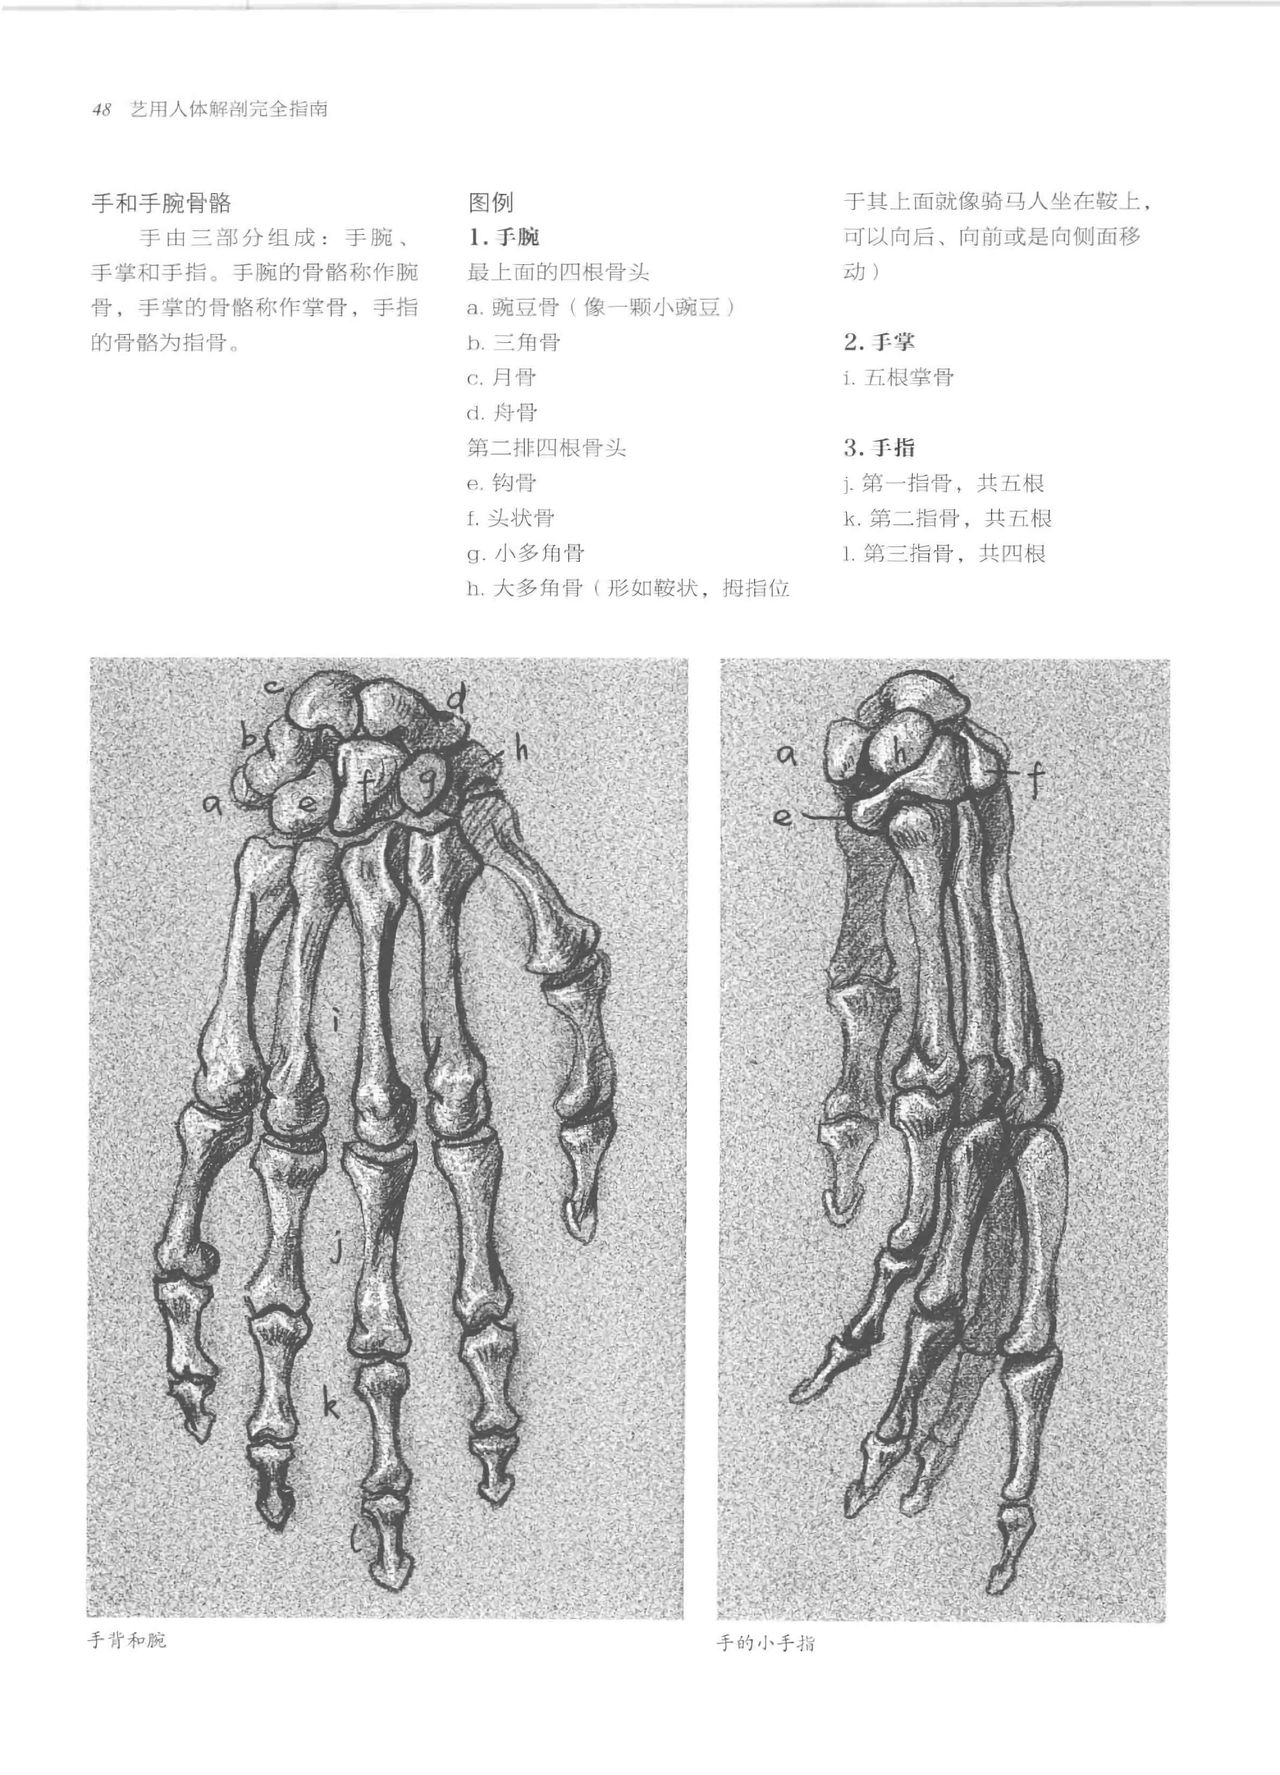 Anatomy-A Complete Guide for Artists - Joseph Sheppard [Chinese] 48